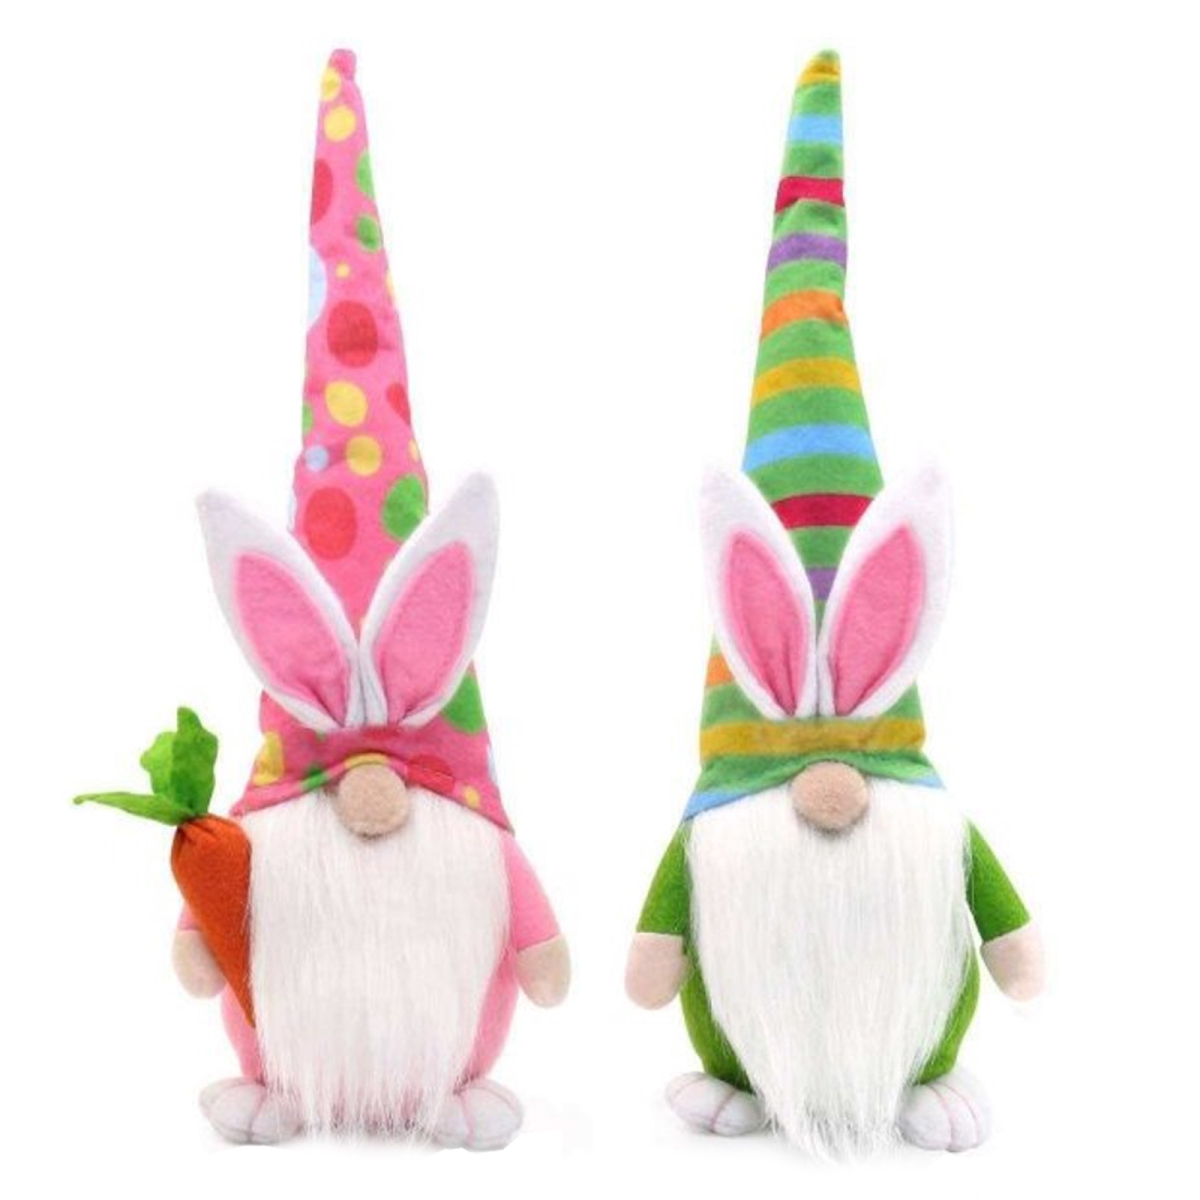 Picture of Santas Workshop 10102 14 in. Easter Gnomes - Set of 2